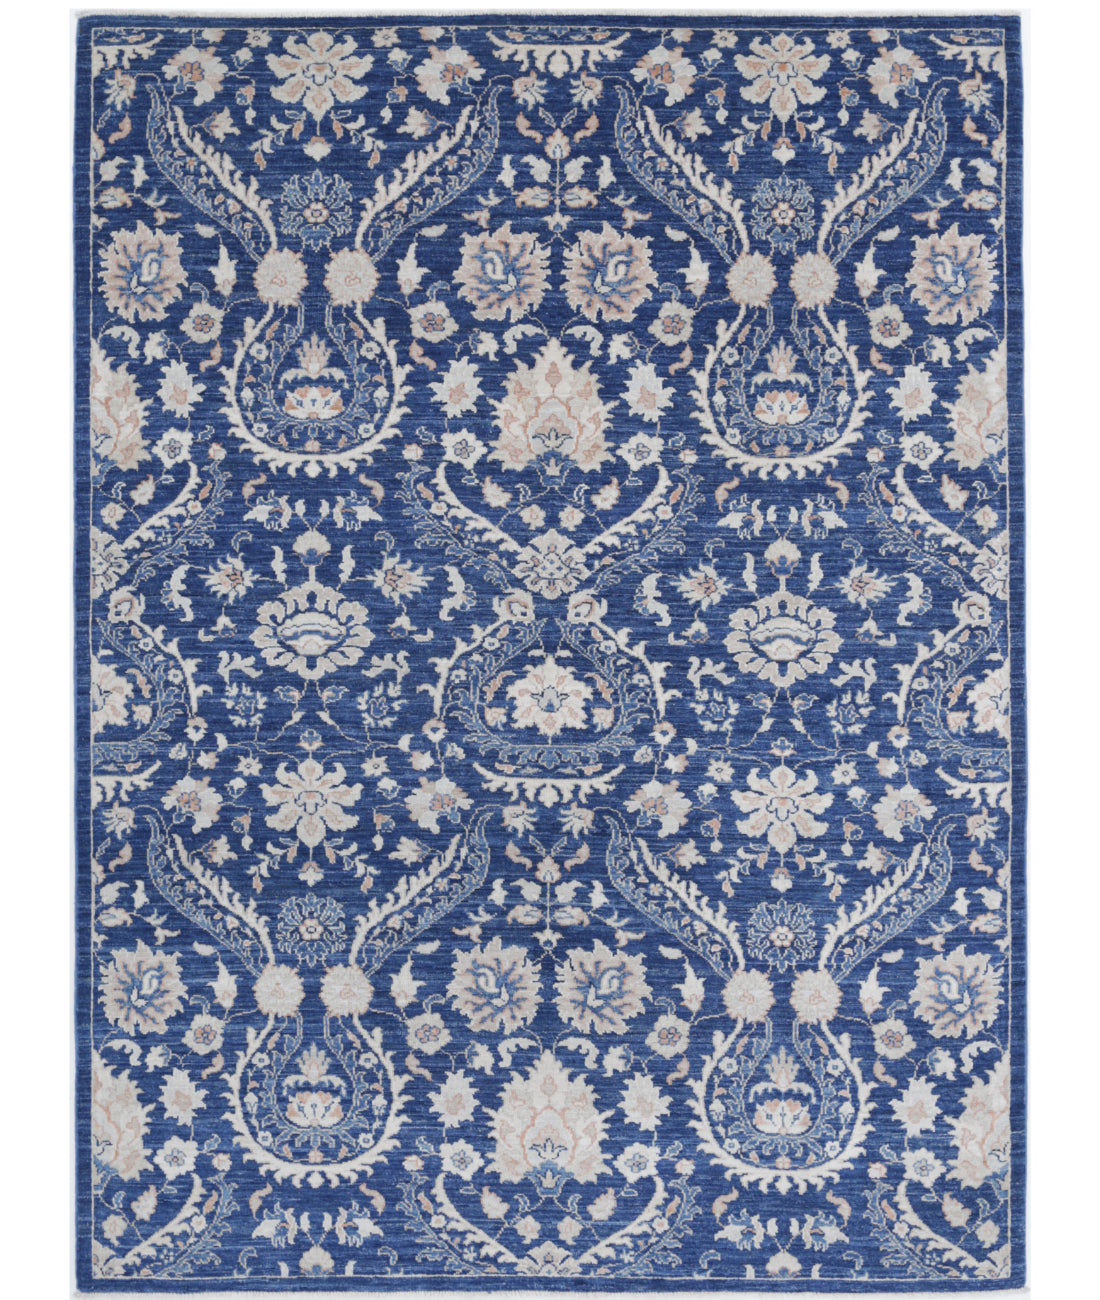 Hand Knotted Artemix Wool Rug - 5'7'' x 7'8'' 5'7'' x 7'8'' (168 X 230) / Blue / Ivory